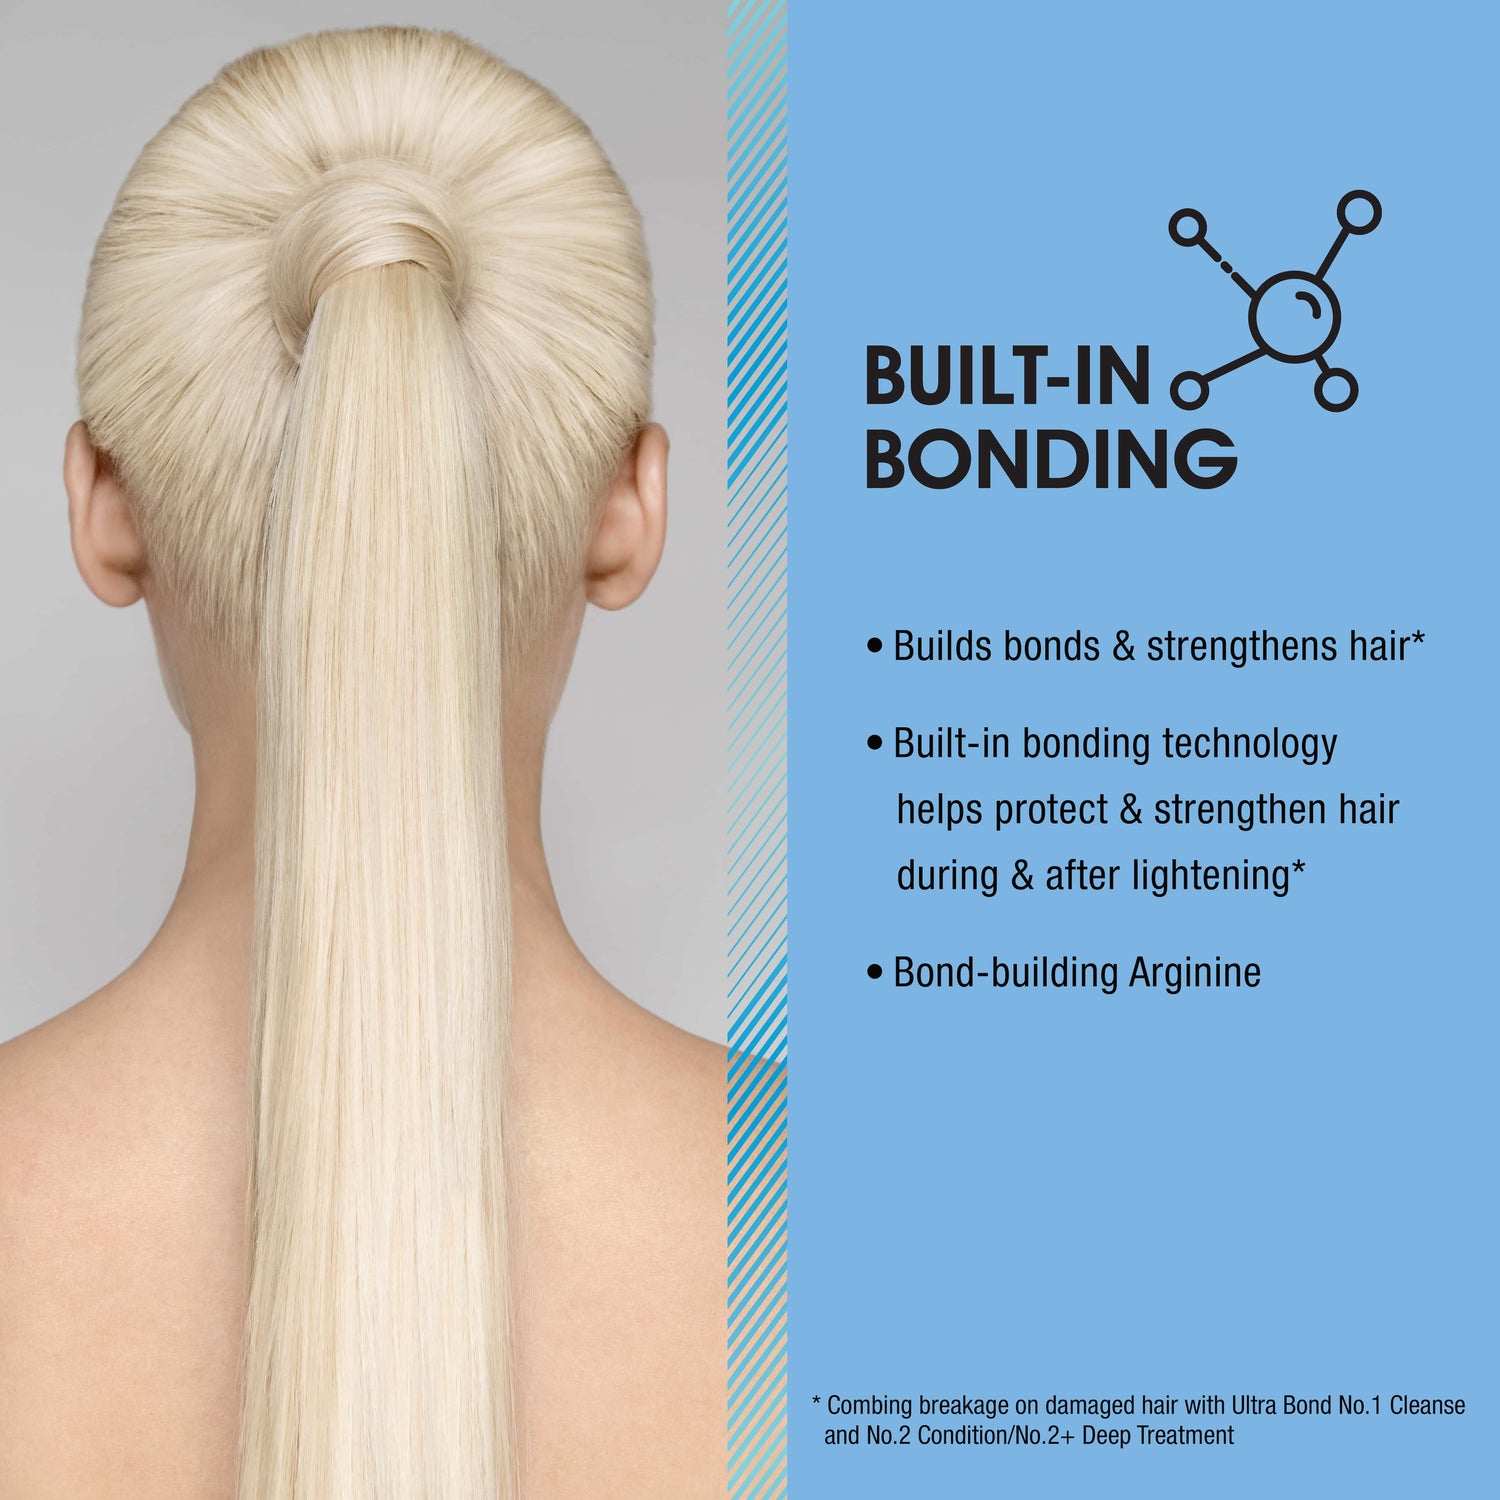 Built In Bonding technology helps protect & strengthen hair during and after lightening.